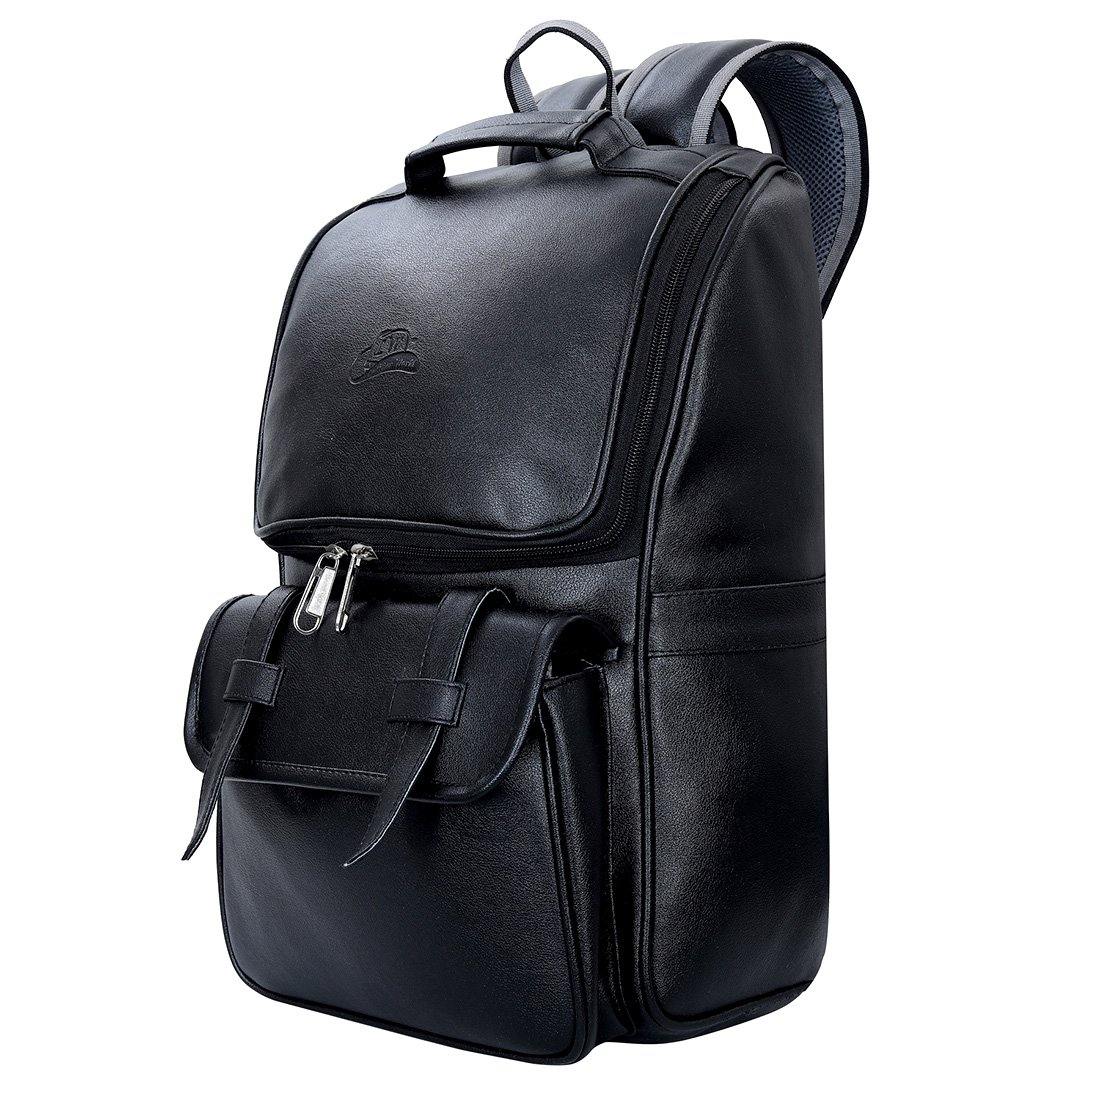 Premium Leatherette Unisex Backpack by Leather World